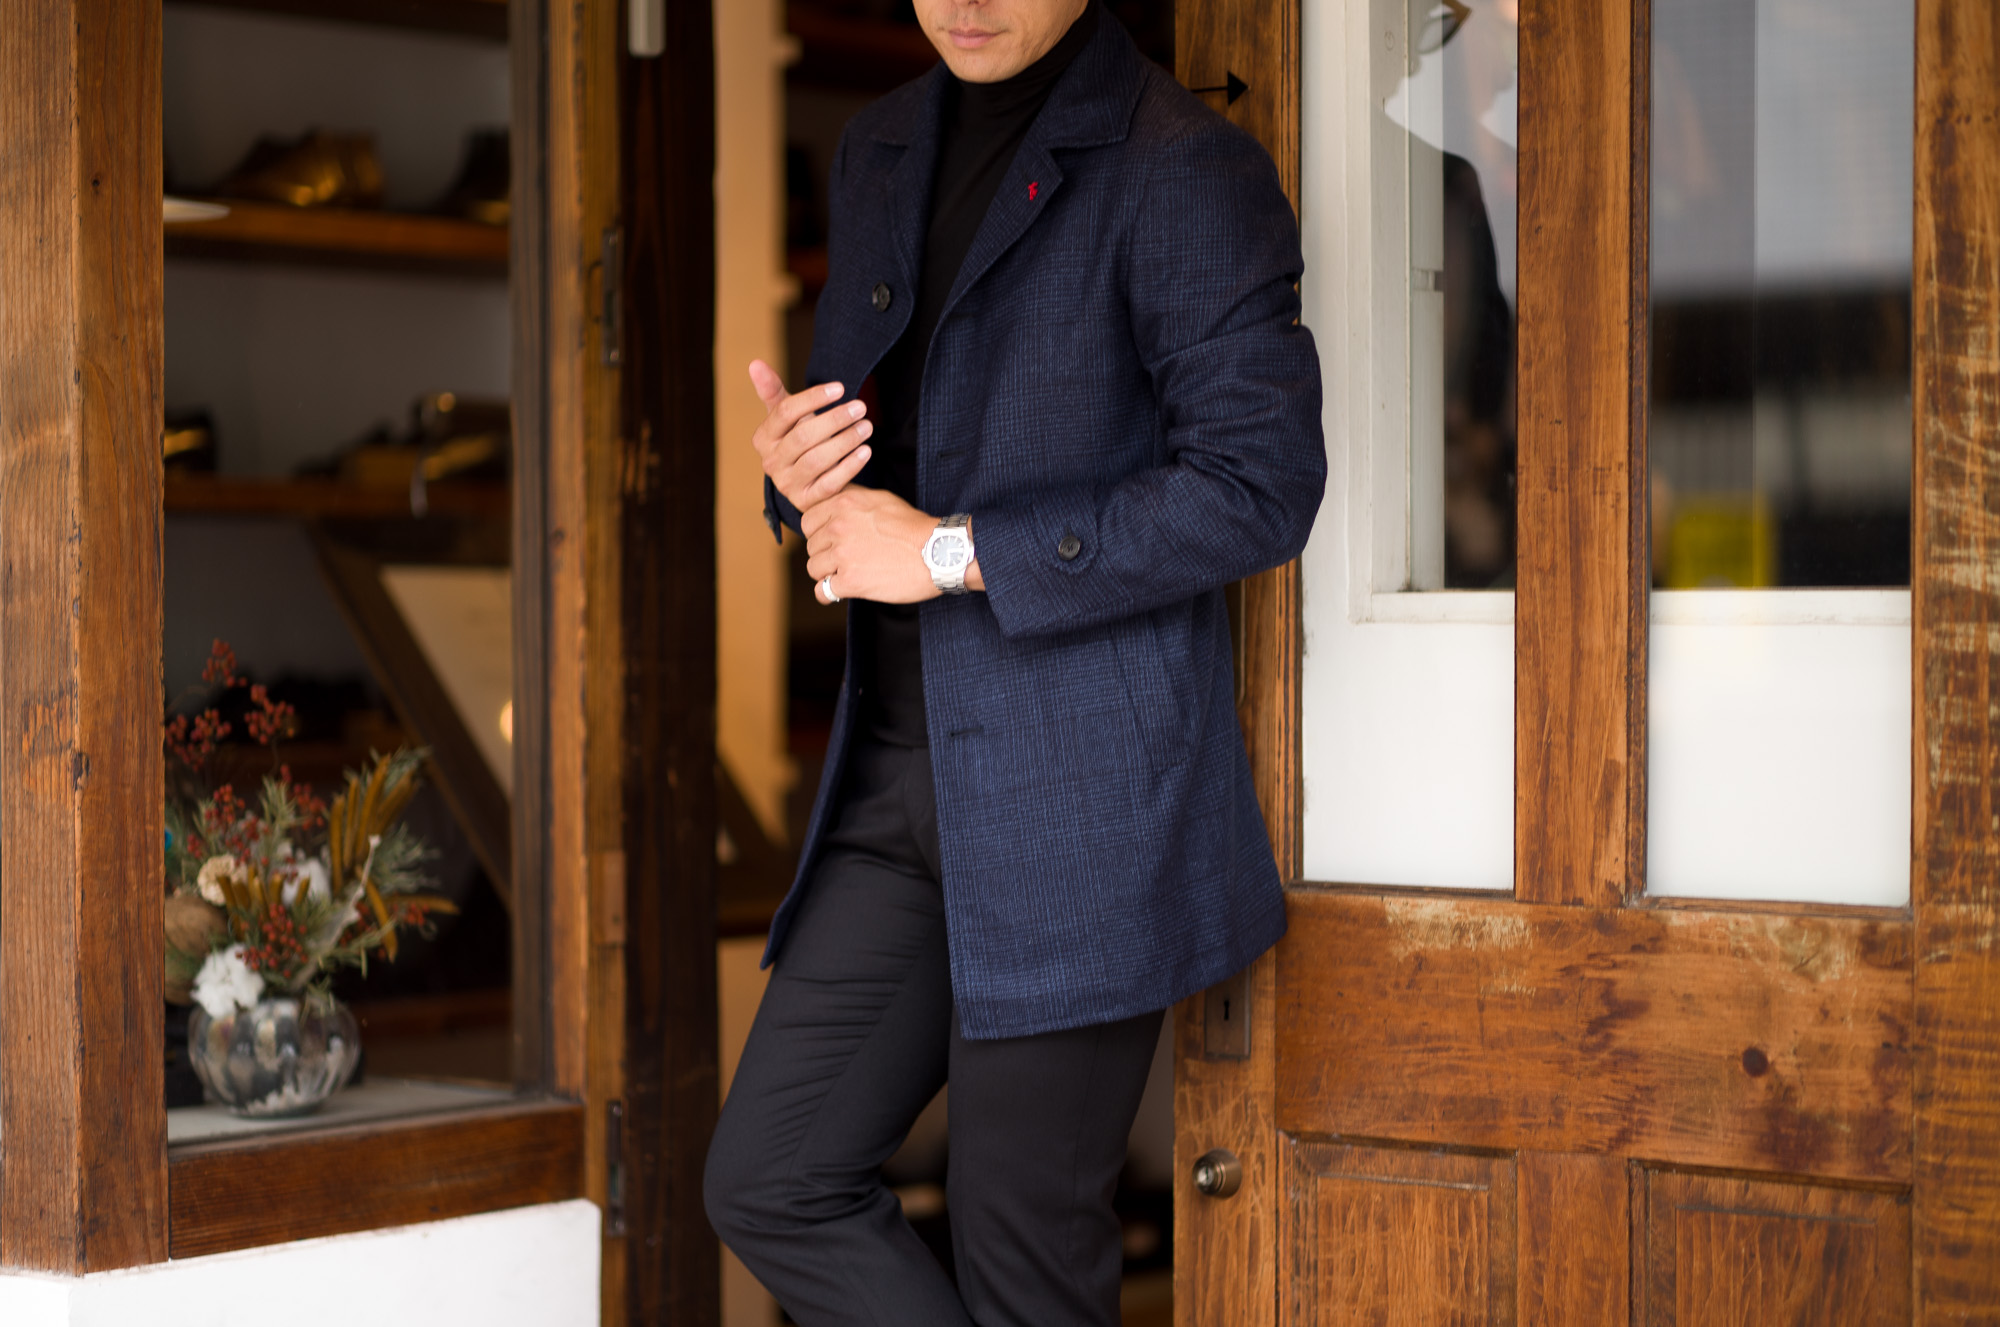 ISAIA(イザイア) CAPPOTTO(カポット) カシミヤ シルク カーコート NAVY(ネイビー) Made in italy (イタリア製) 2022秋冬【Special Model】愛知 名古屋 Alto e Diritto altoediritto アルトエデリット イザイア オーダー会 受注会